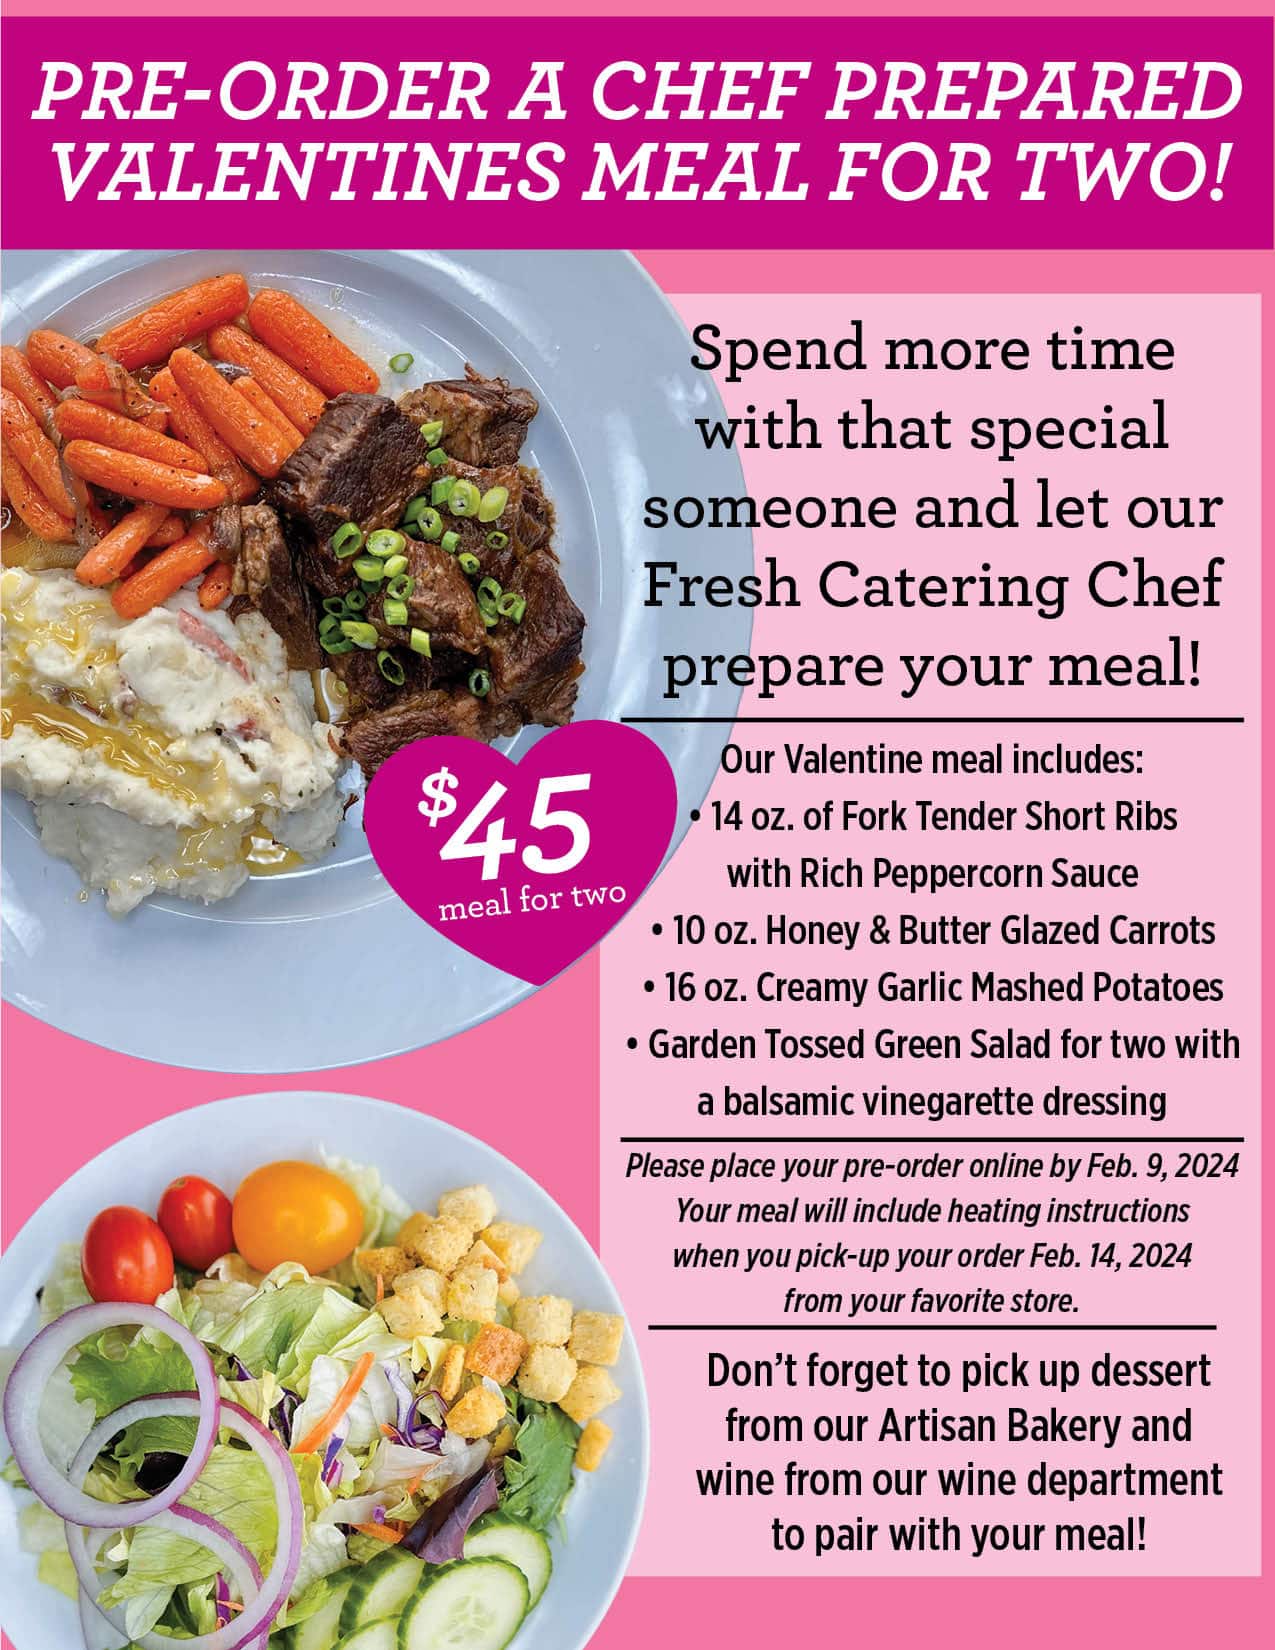 Spend more time with that special someone and let our Fresh Catering Chef prepare your meal!<br />
Our Valentine meal includes:<br />
• 14 oz. of Fork Tender Short Ribs<br />
with Rich Peppercorn Sauce<br />
• 10 oz. Honey & Butter Glazed Carrots<br />
• 16 oz. Creamy Garlic Mashed Potatoes<br />
• Garden Tossed Green Salad for two with<br />
a balsamic vinegarette dressing<br />
Don’t forget to pick up dessert from our Artisan Bakery and wine from our wine department to pair with your meal!<br />
Please place your pre-order online by Feb. 9, 2024<br />
Your meal will include heating instructions<br />
when you pick-up your order Feb. 14, 2024<br />
from your favorite store.